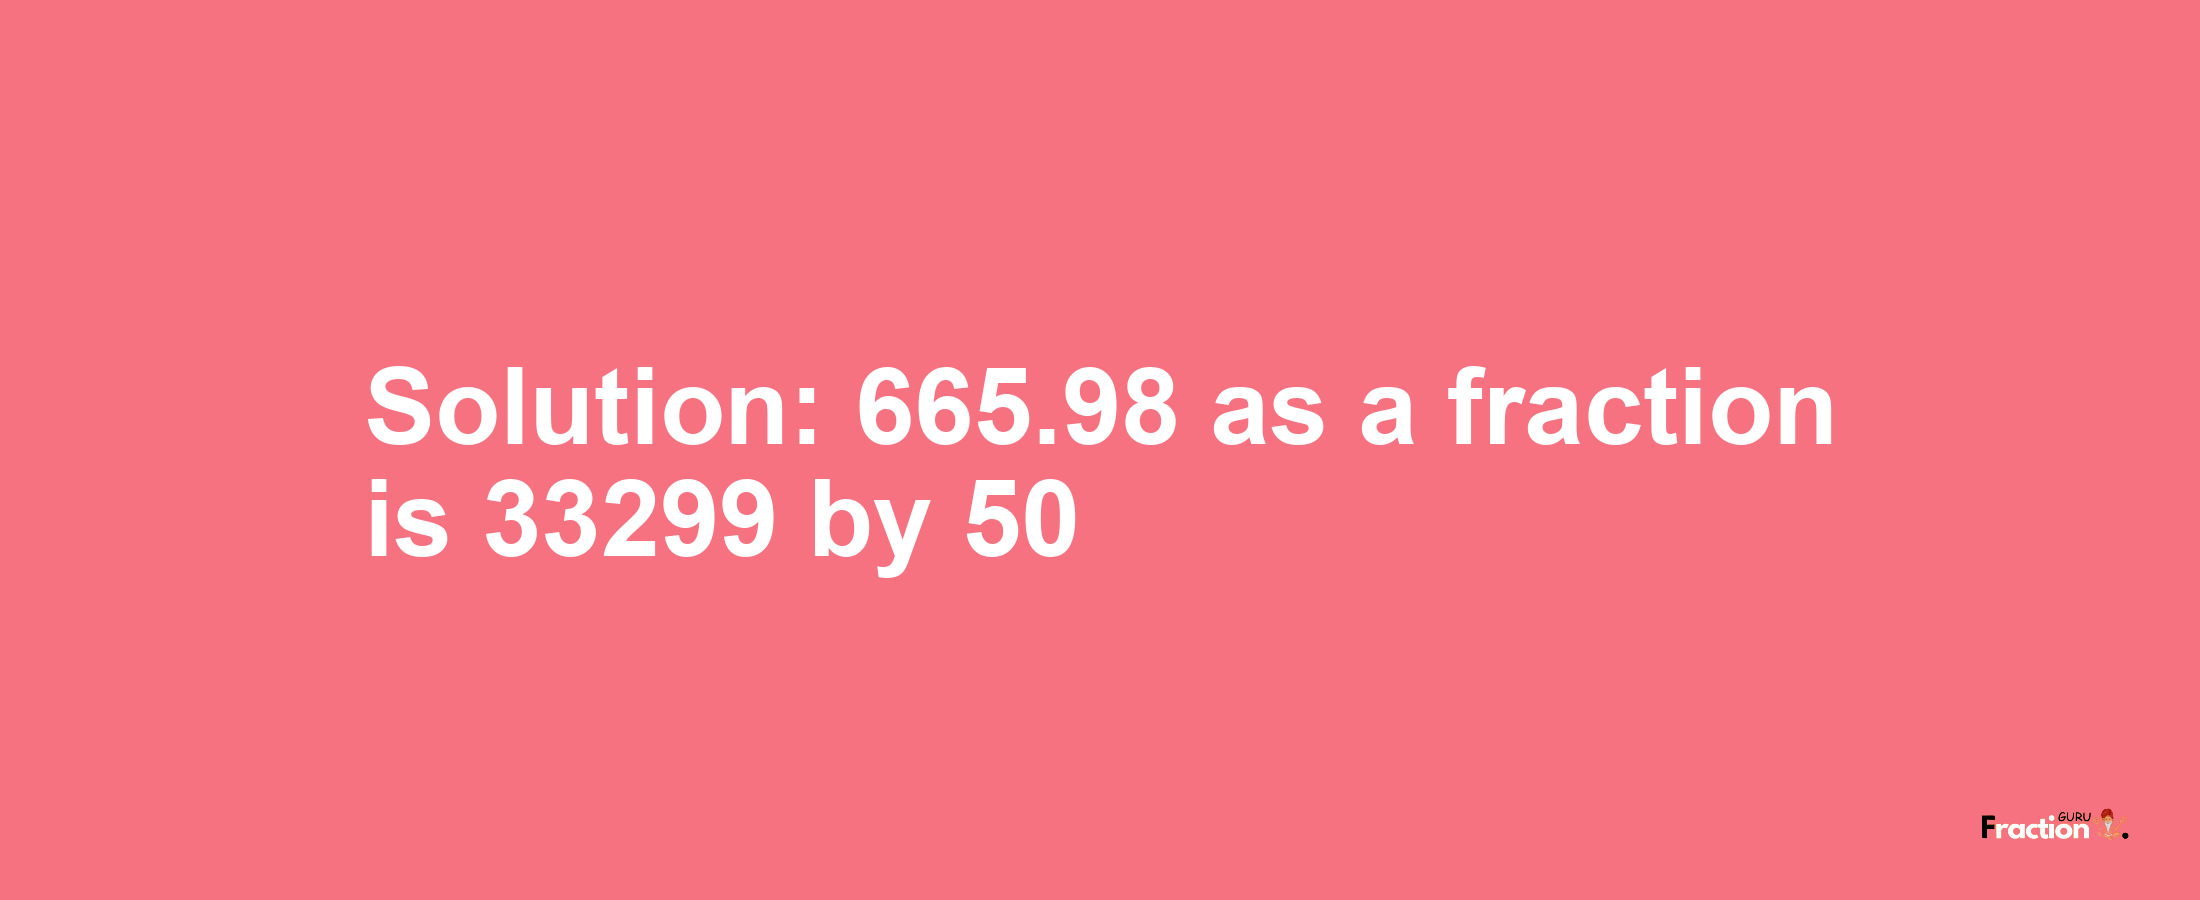 Solution:665.98 as a fraction is 33299/50